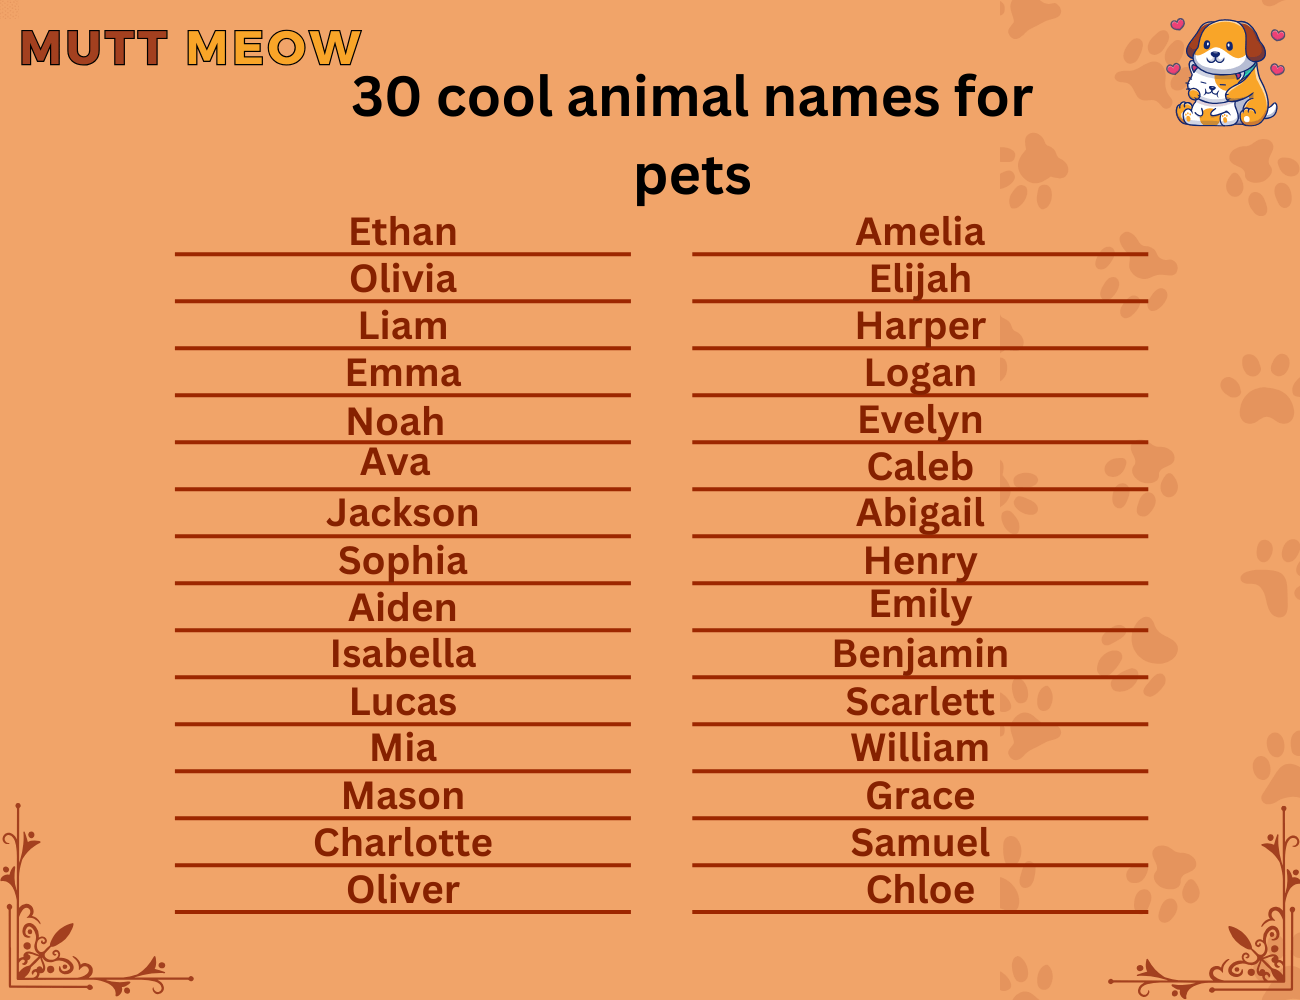 30 cool animal names for pets